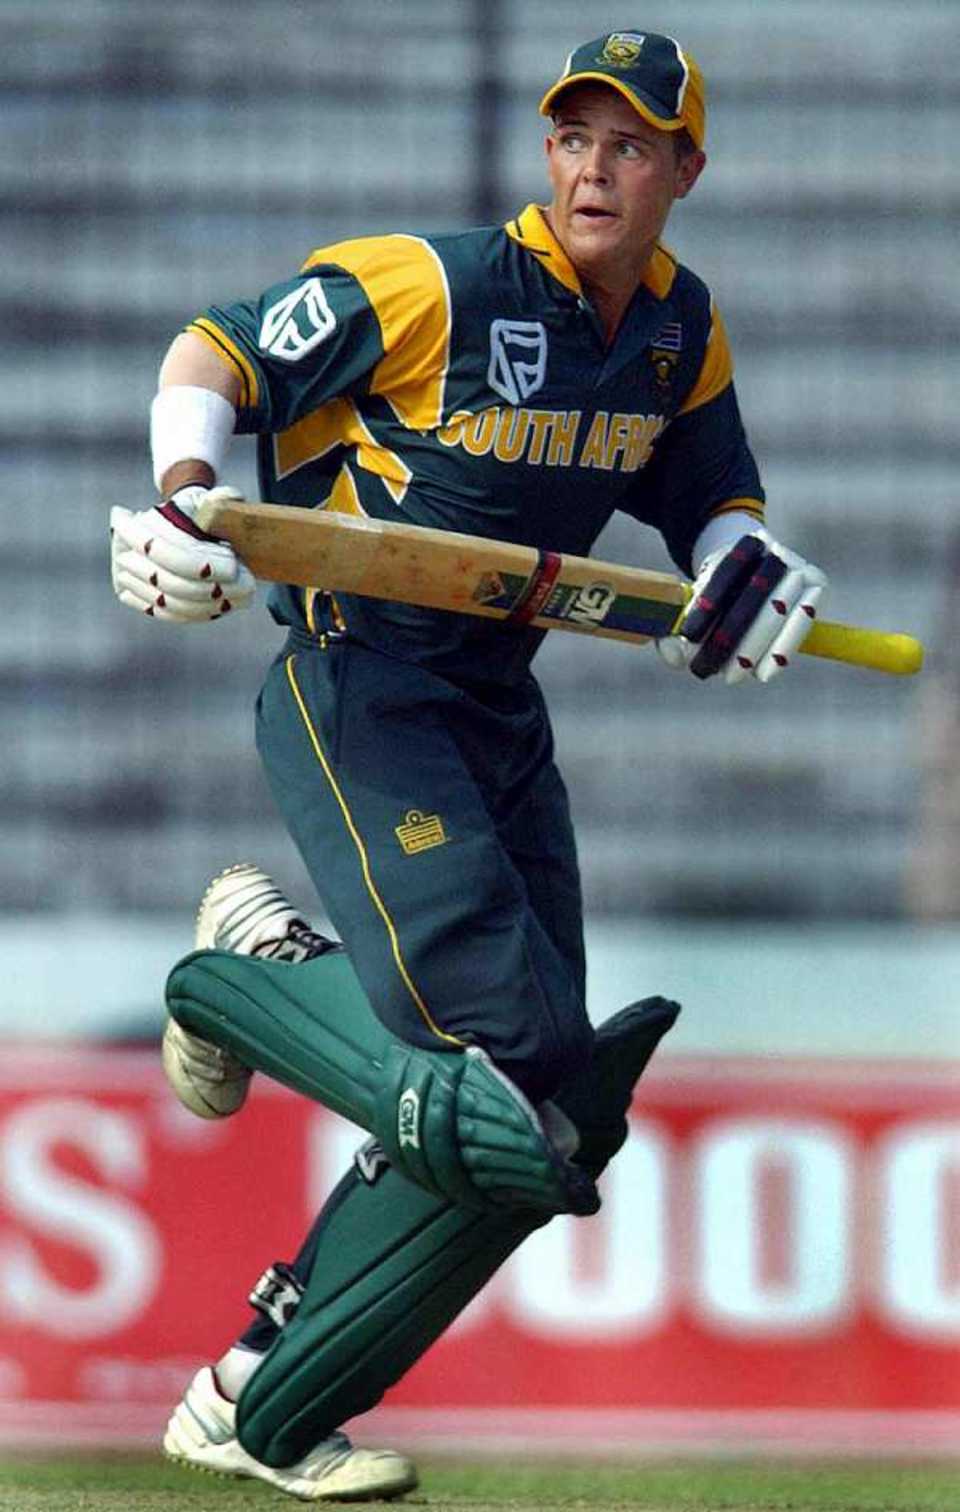 South African batsman Jacques Rudolph, during his innings of 81 against Bangladesh in the TVS tri-nation tournament in Dhaka, 17 Apr 2003